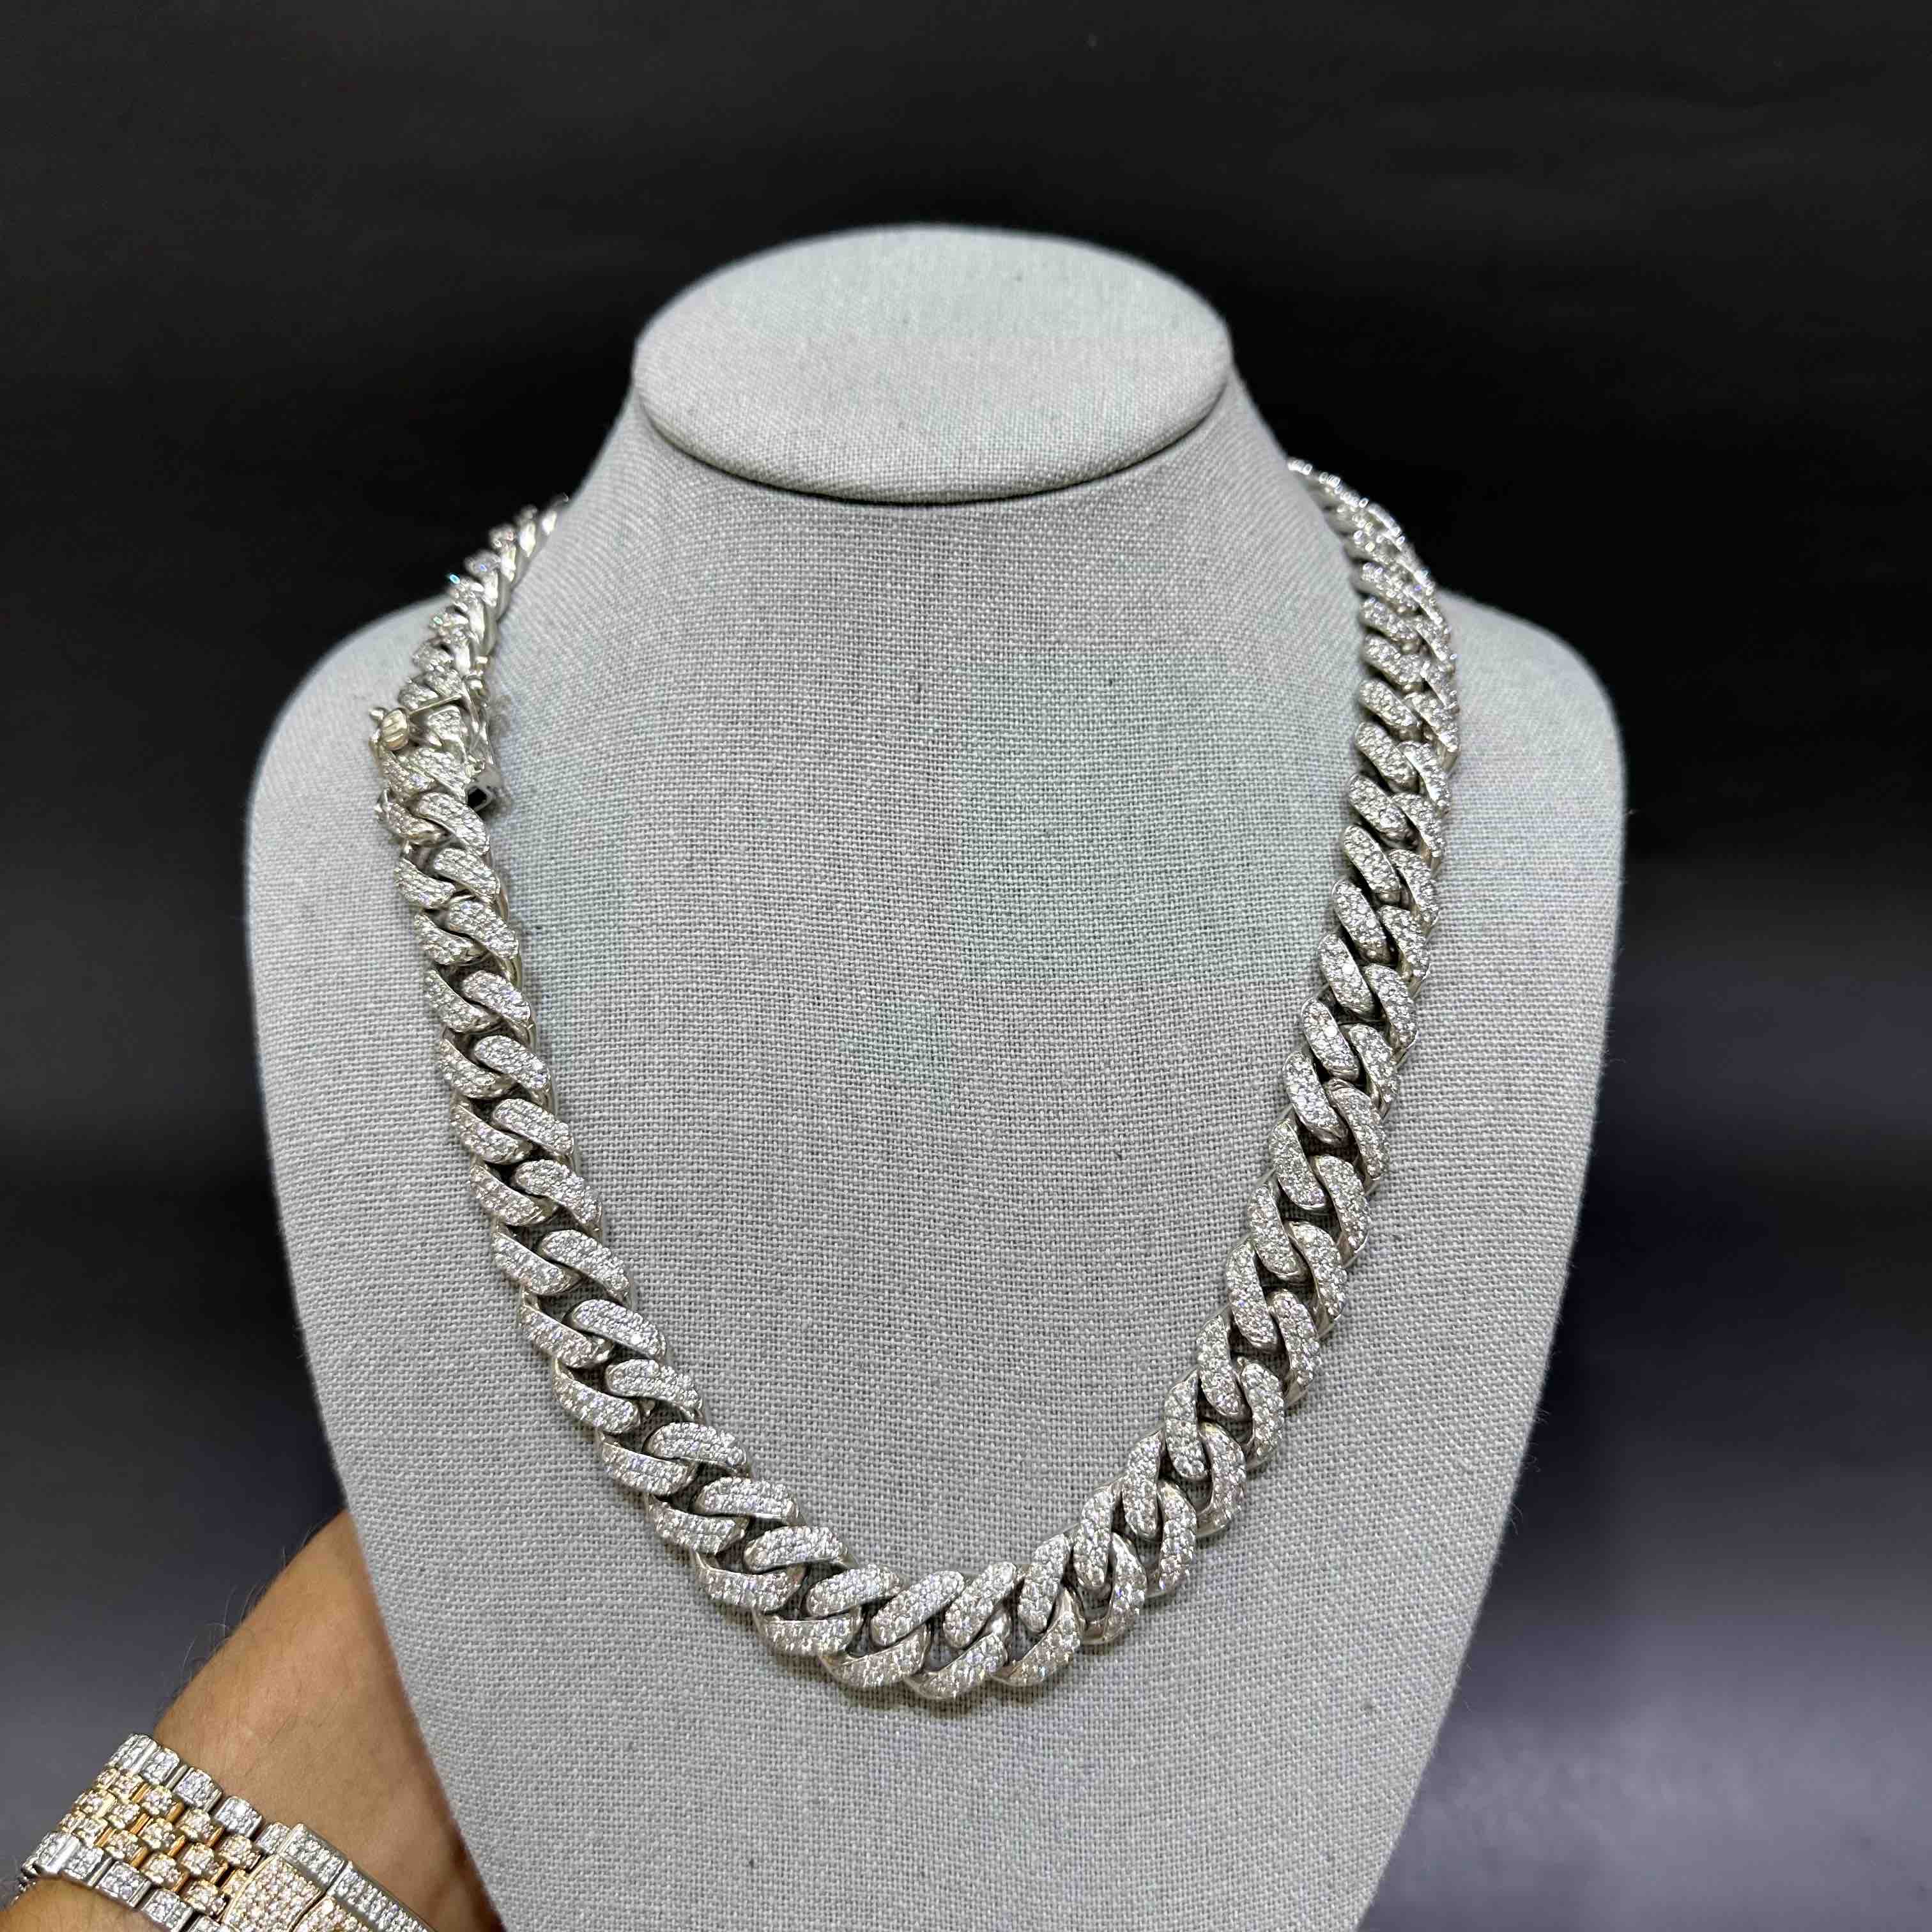 CED OUT CUBAN LINK 22inches 20+ cts natural diamonds 240.9 grams